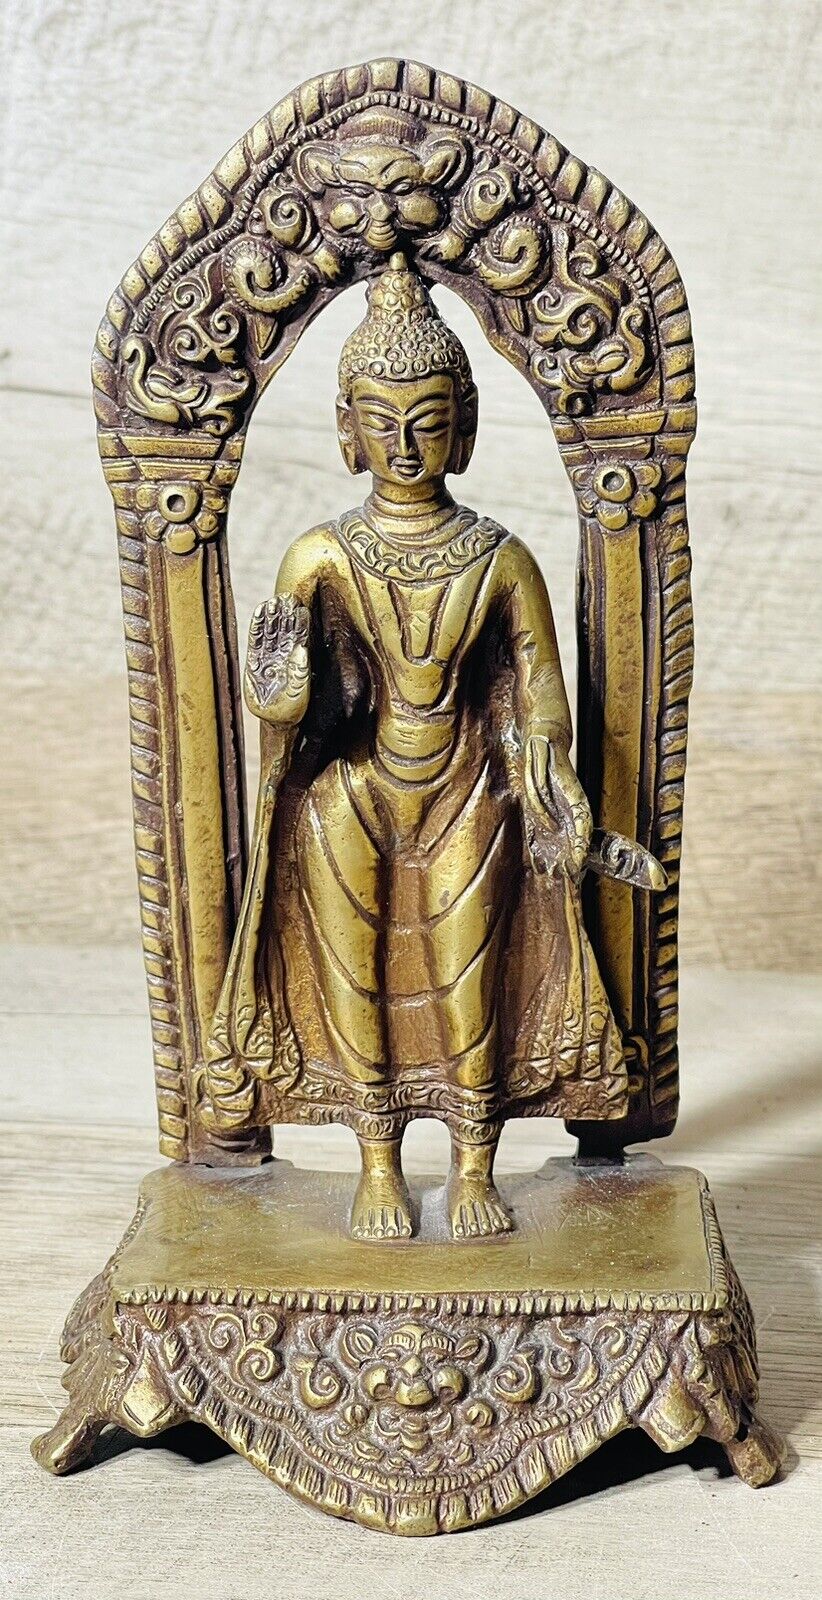 Antique Vintage Solid Brass Asian Standing Buddha Figurine 7” Tall